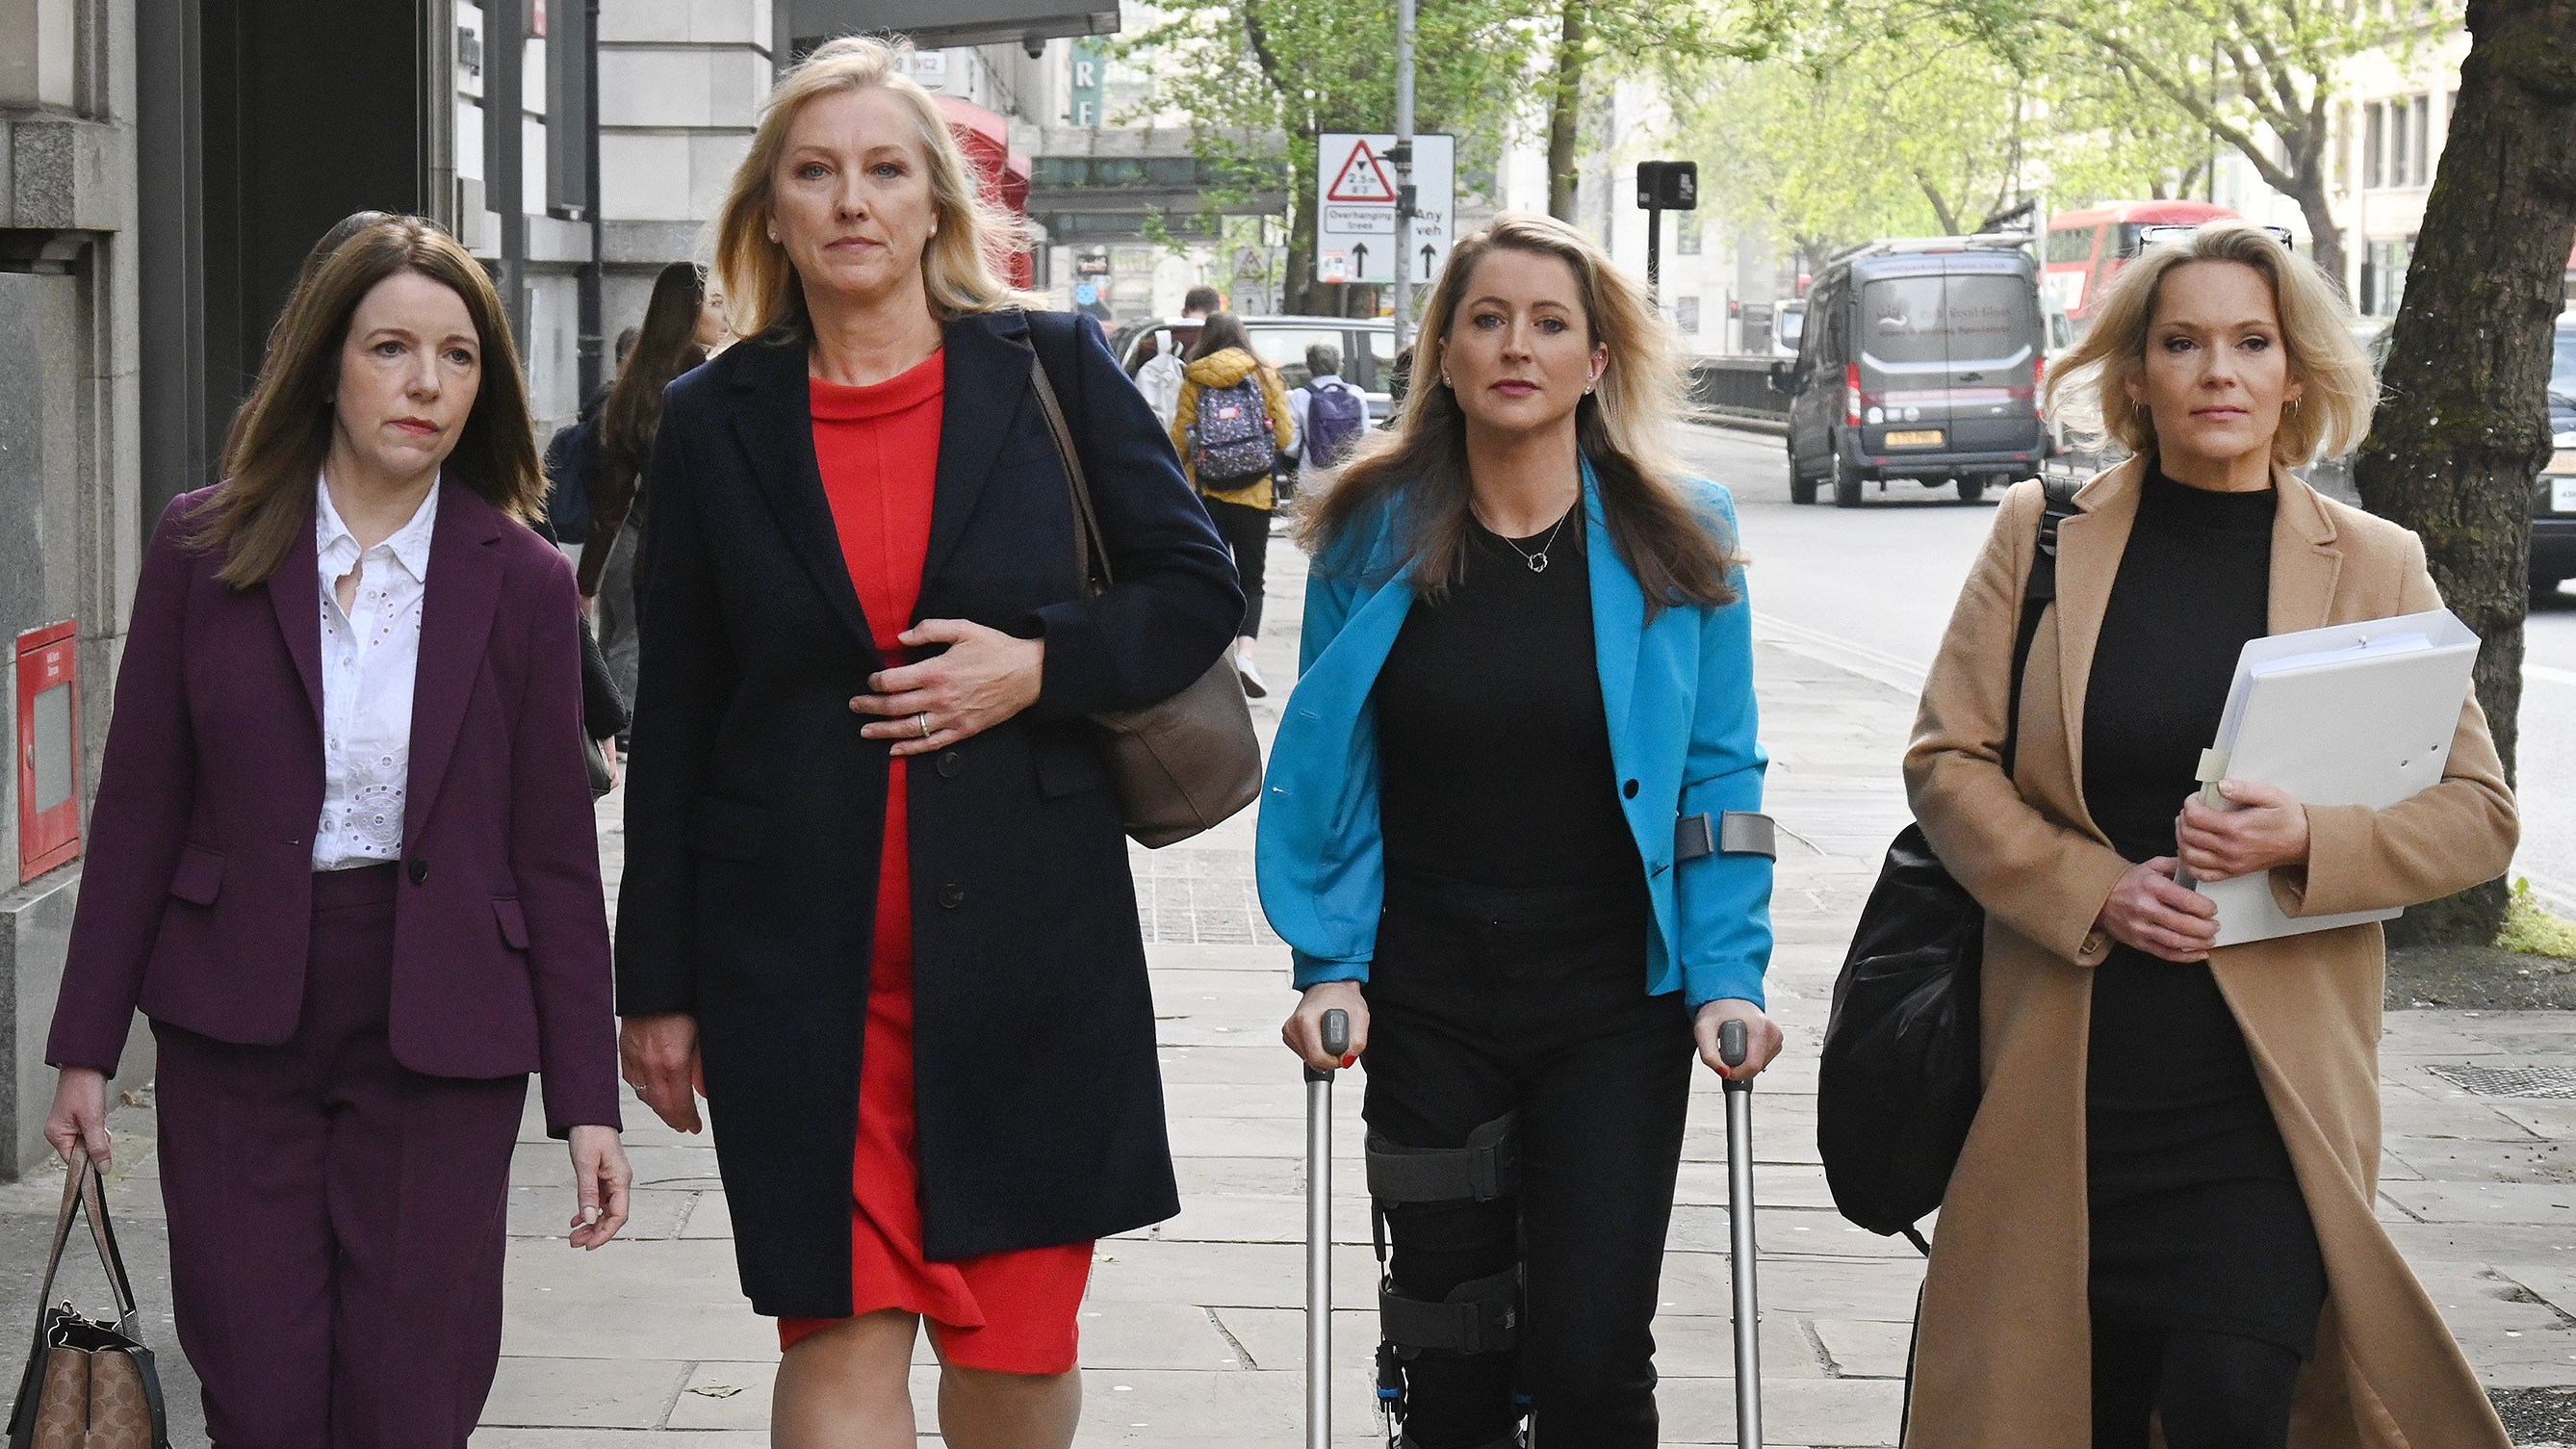 Annita McVeigh, Martine Croxall, Karin Giannone and Kasia Madera arrive at the London Central Employment Tribunal. They accuse the BBC of victimising them for bringing equal pay claims